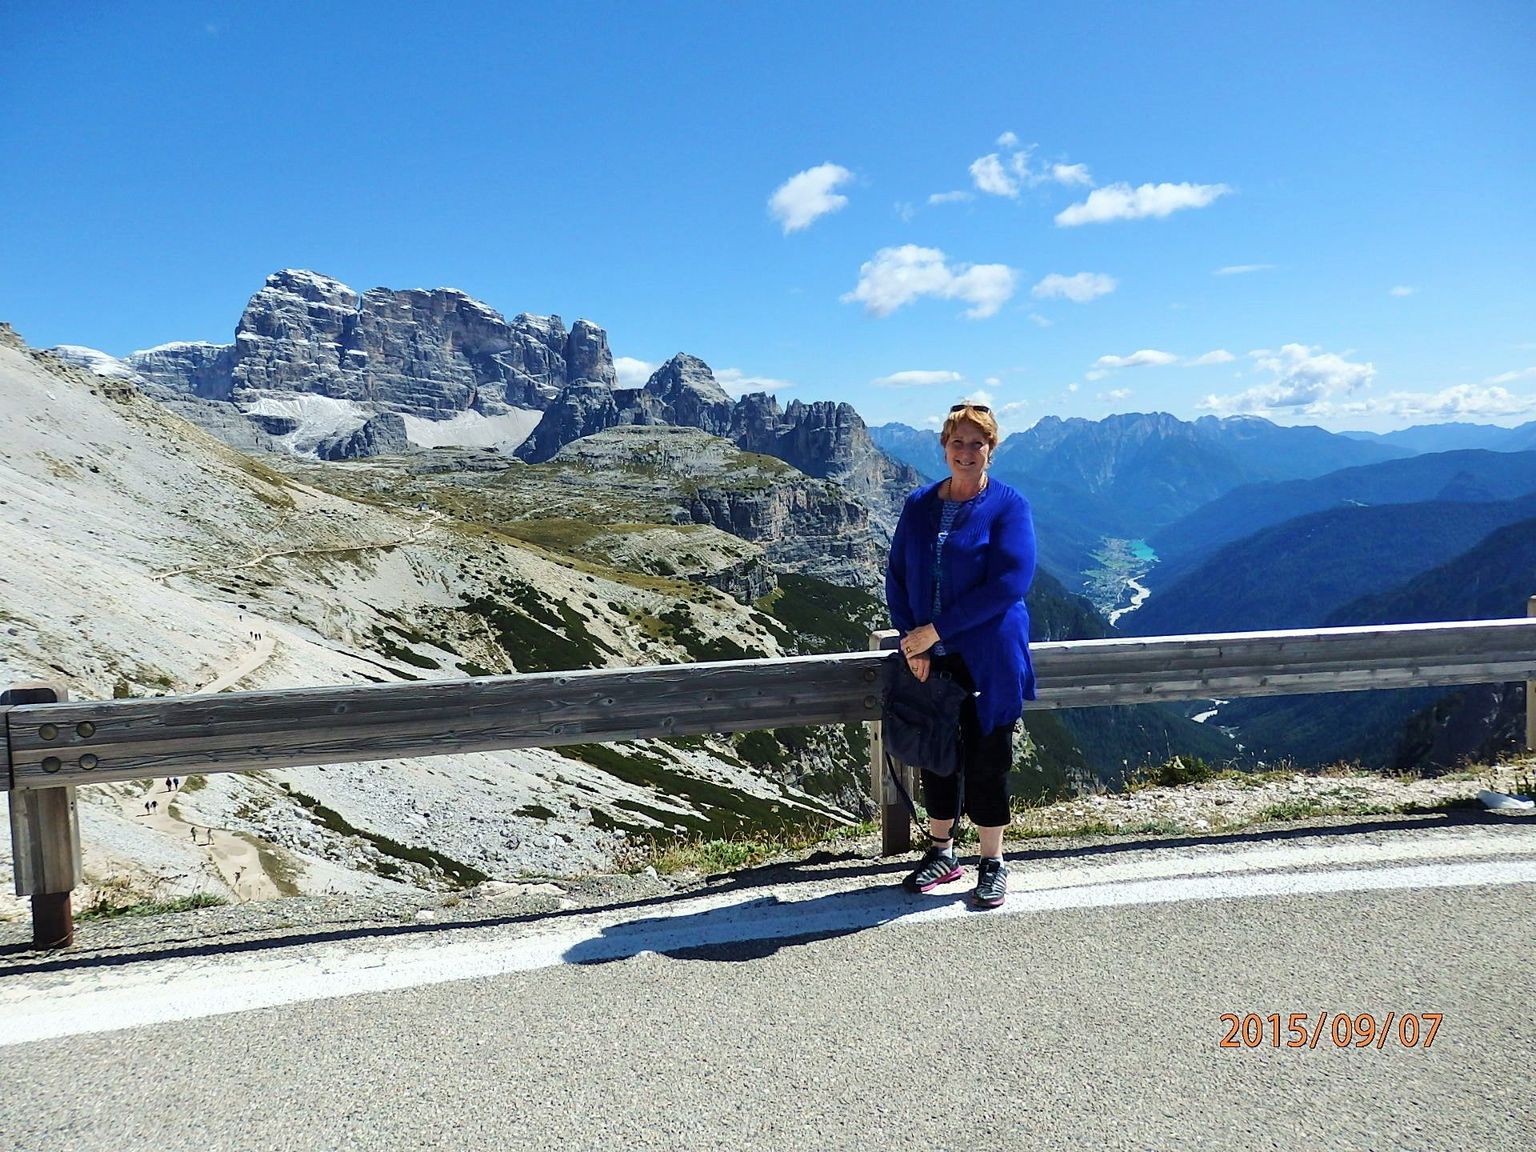 Experience the Dolomite mountains